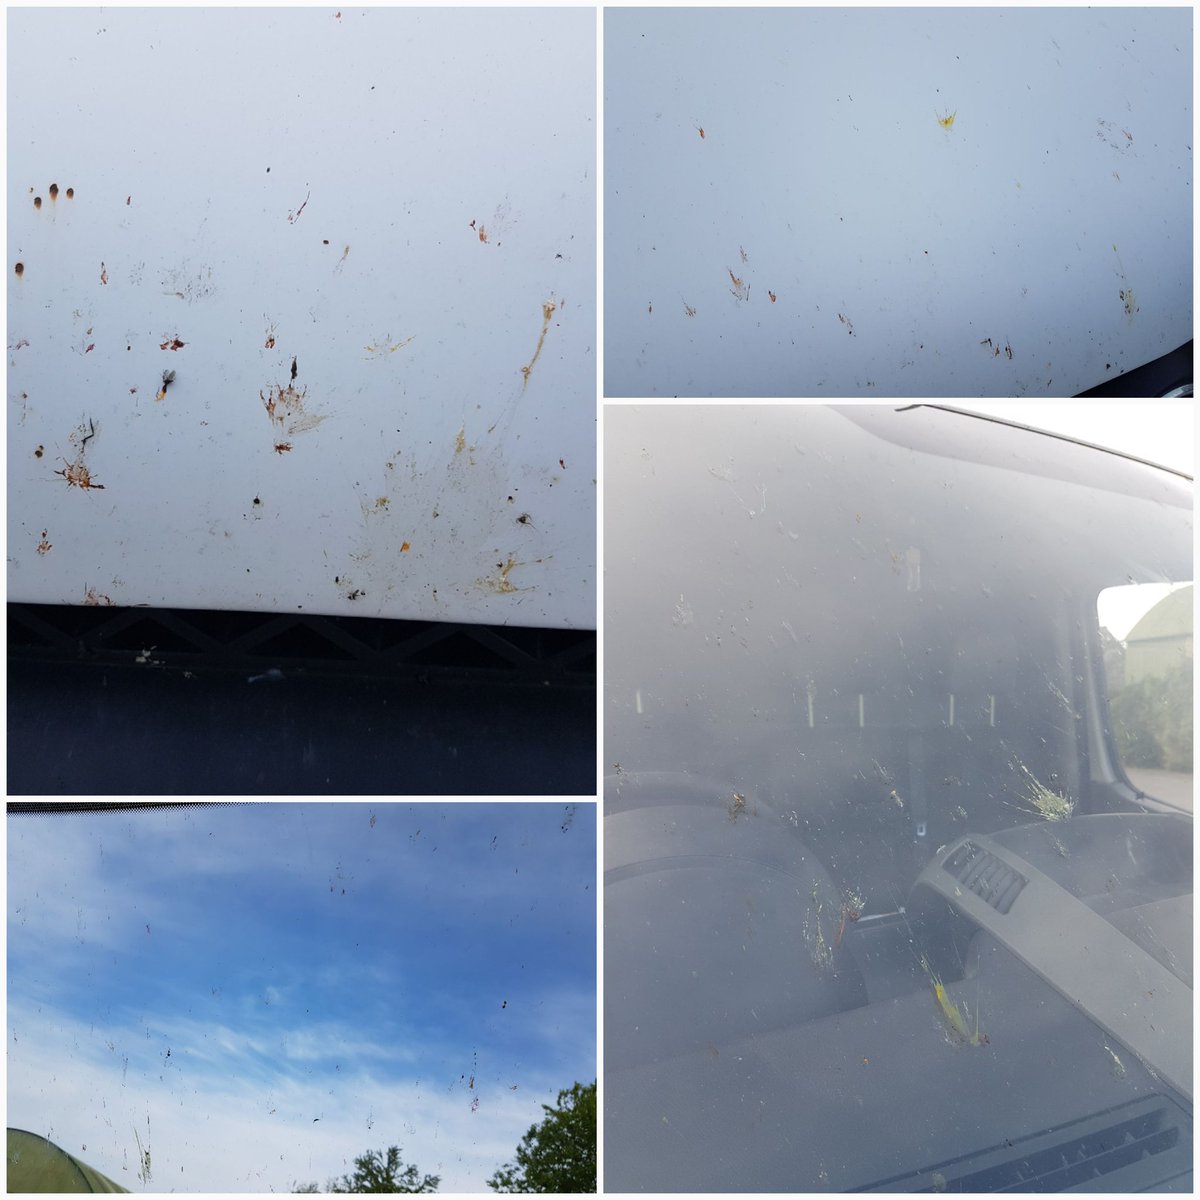 Short thread about insects:1. Had a van driver delivering to me today. His van covered in squashed insects. He said he hasn't seen the likes in 25 years. I was noticing the same a few days ago.